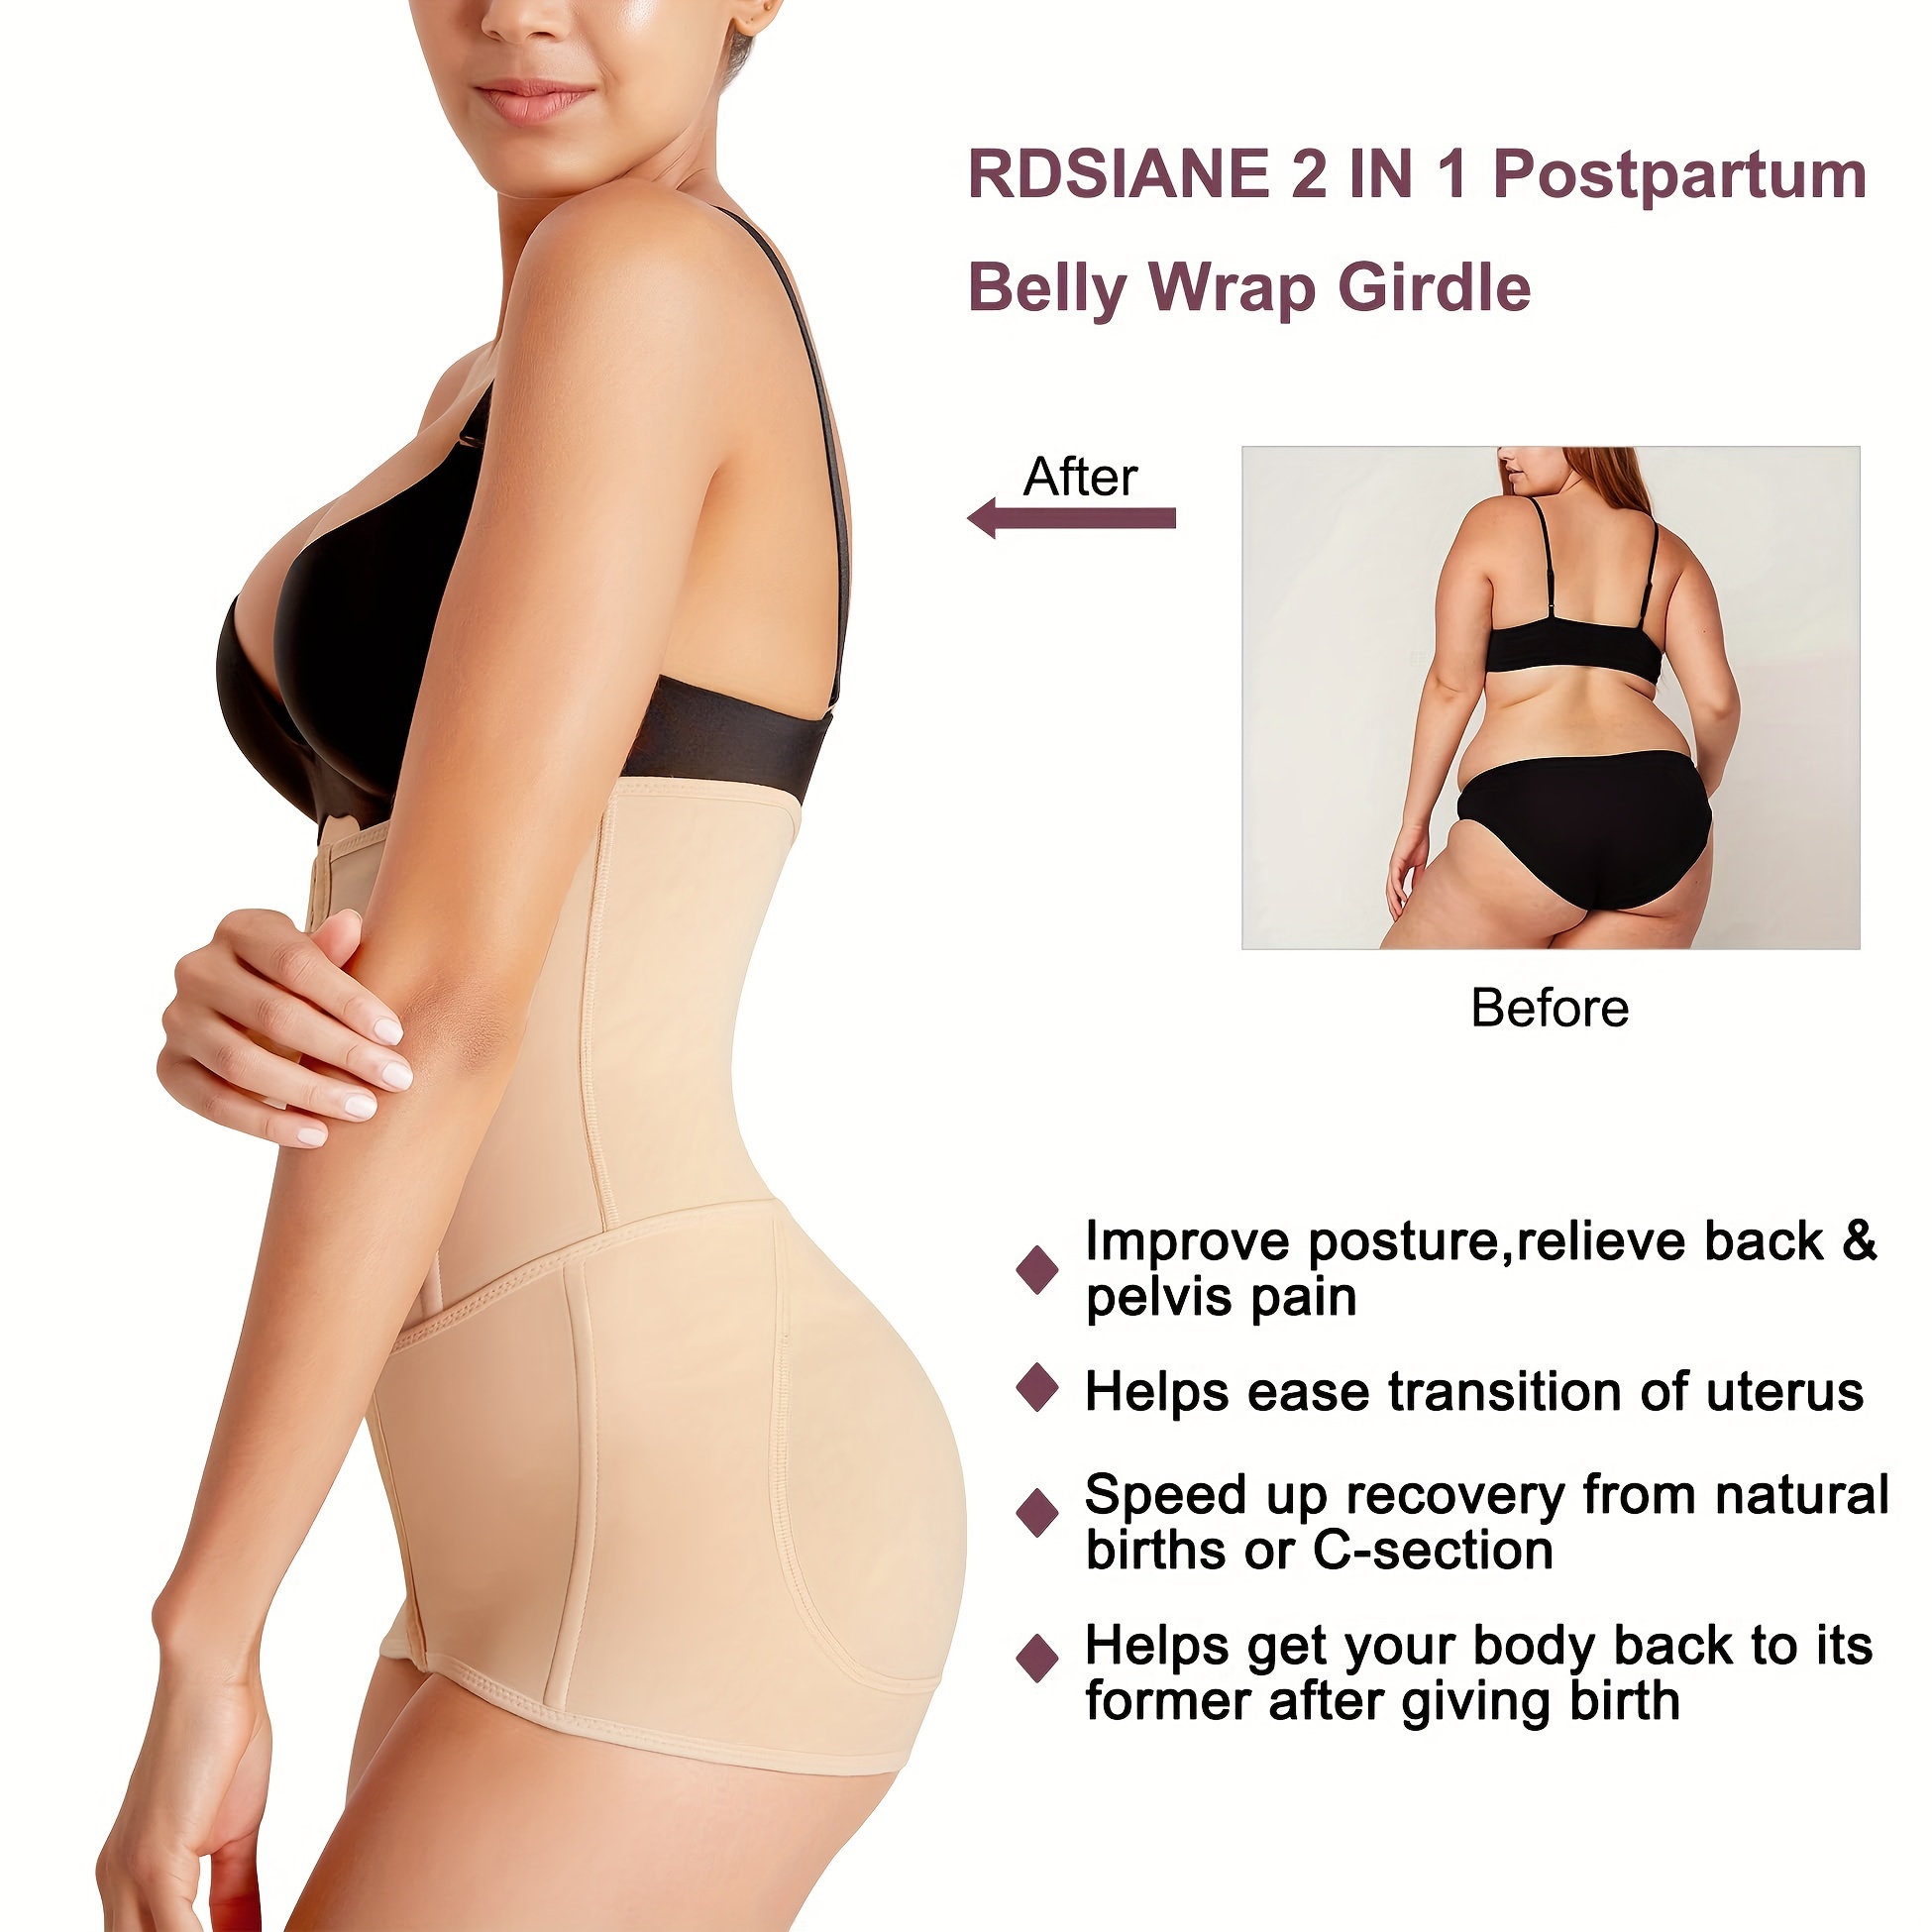 Details about Lady Postpartum Belly Recovery Band After Baby Tummy Tuck Belt  Body Slim Shaper